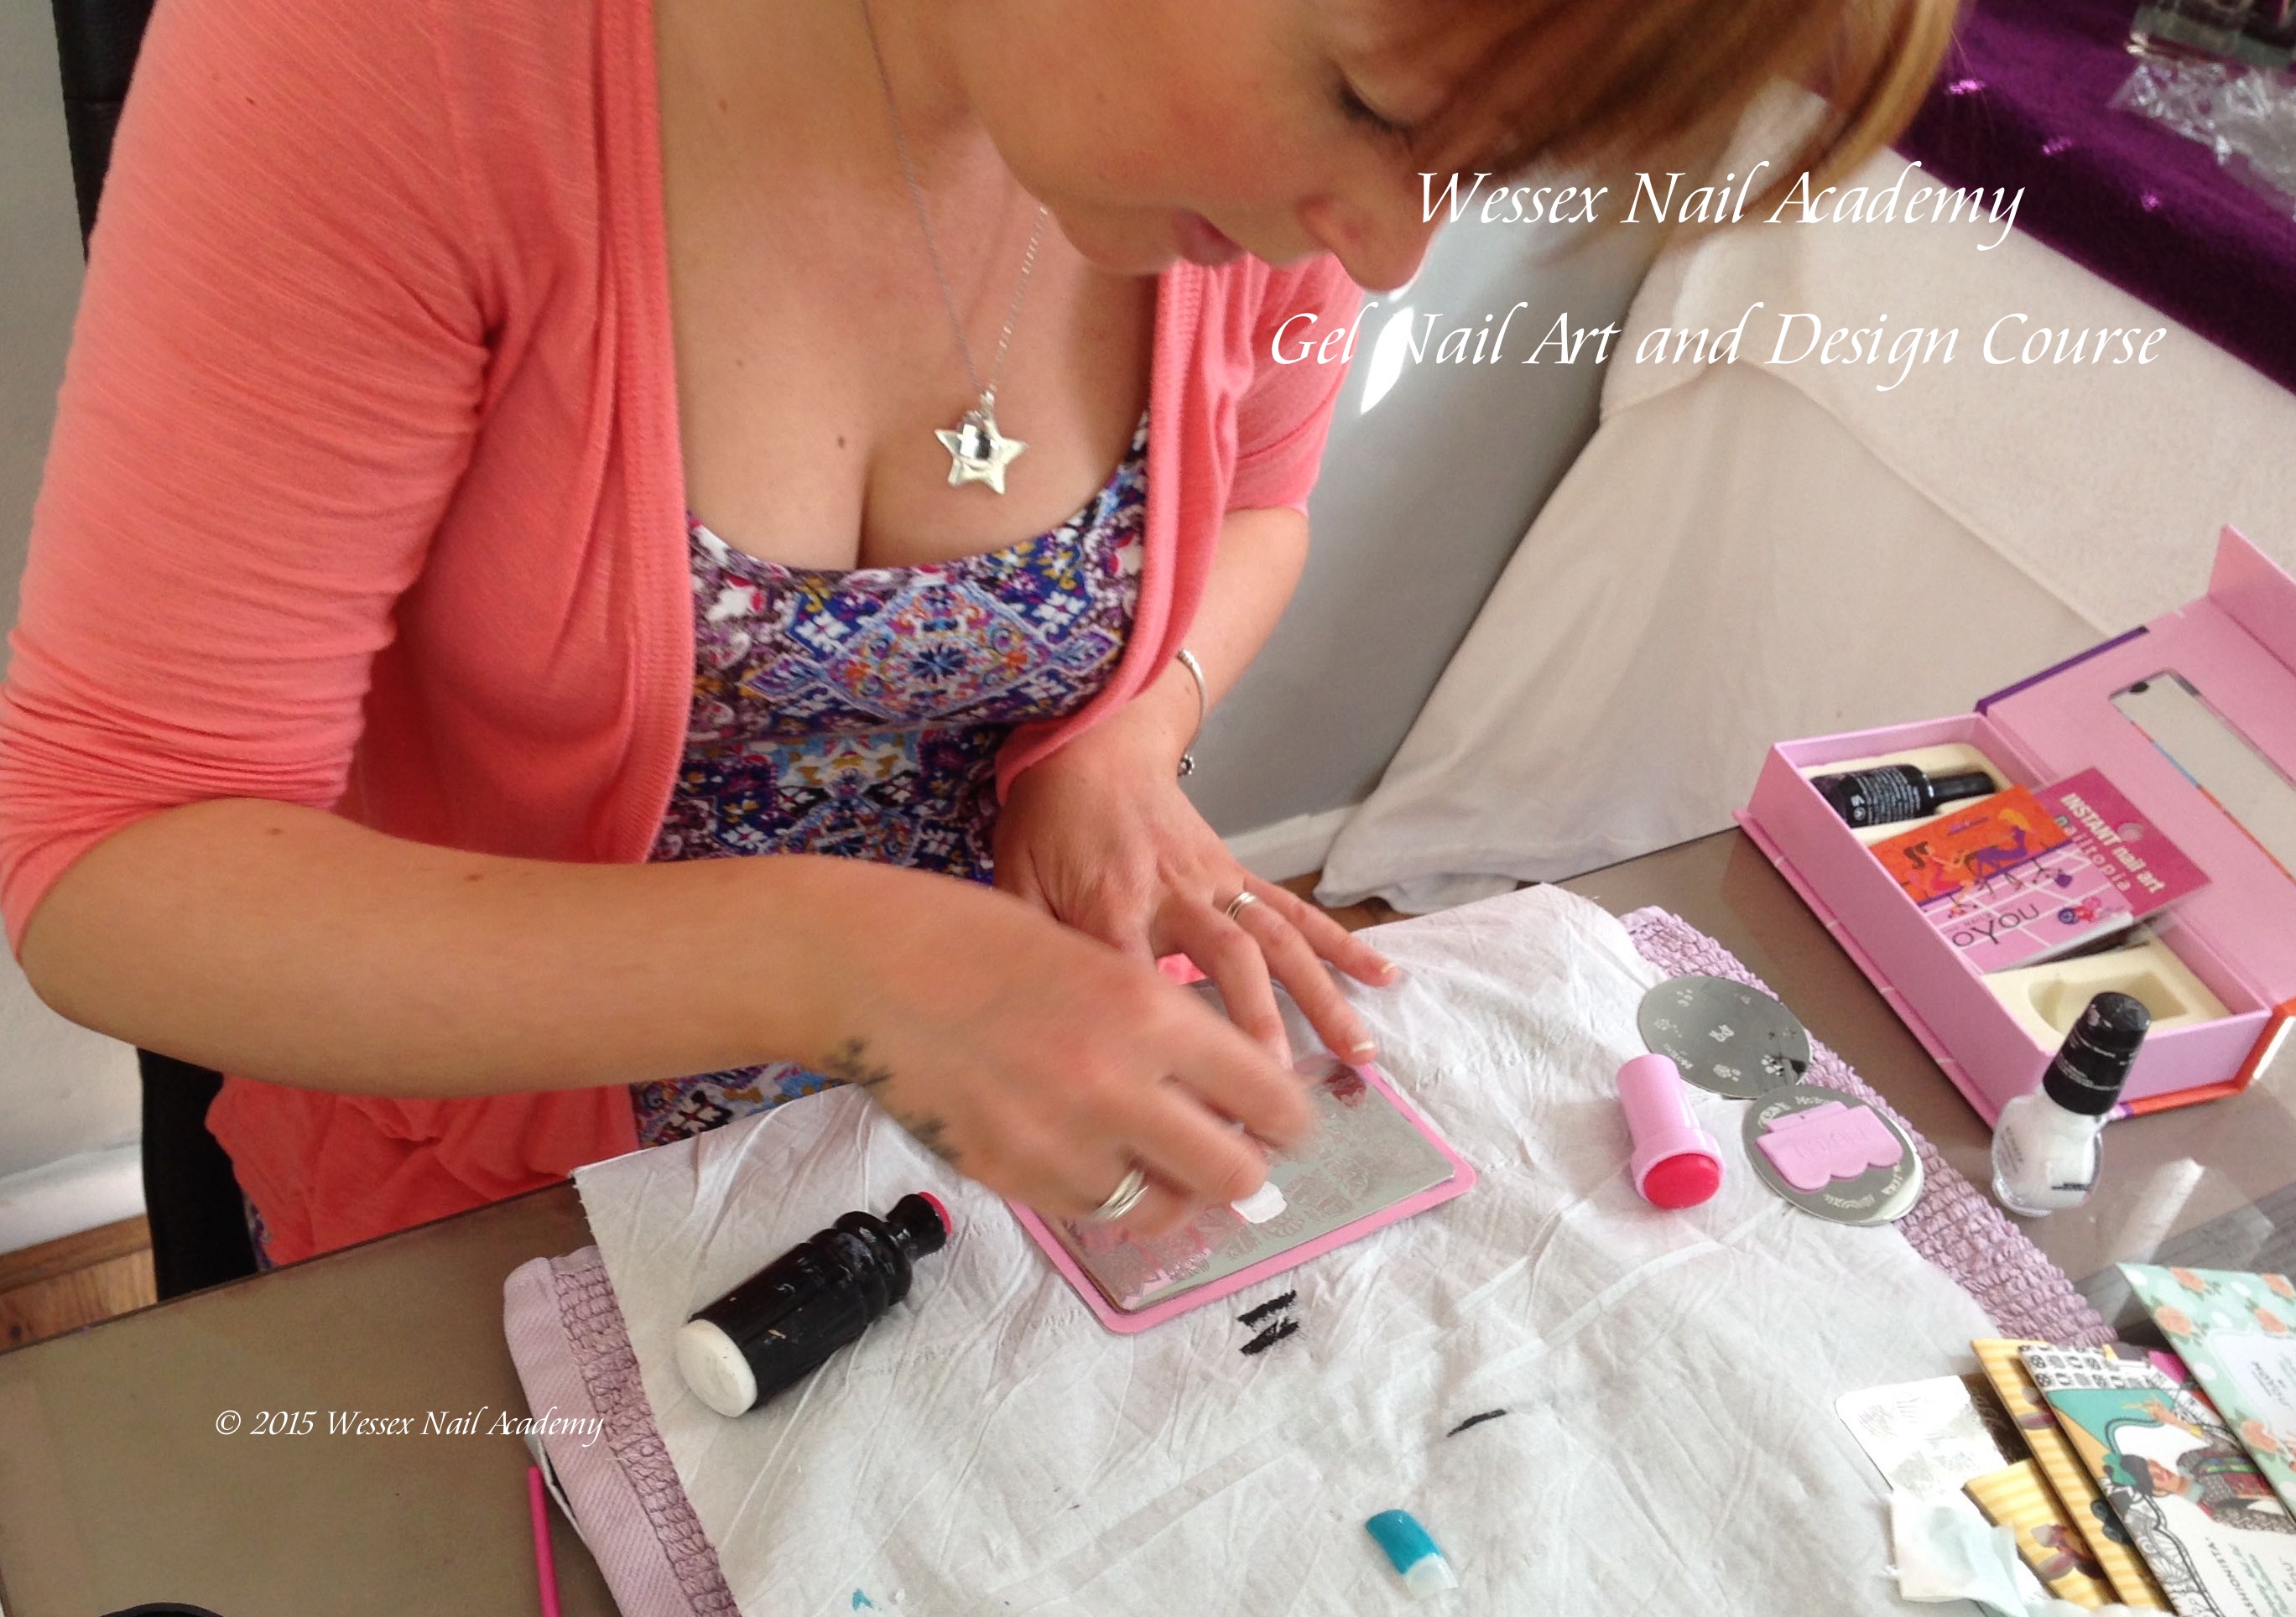 Nail Art Courses, Nail extension training, nail training course, Wessex Nail Academy Okeford Fitzpaine, Dorset